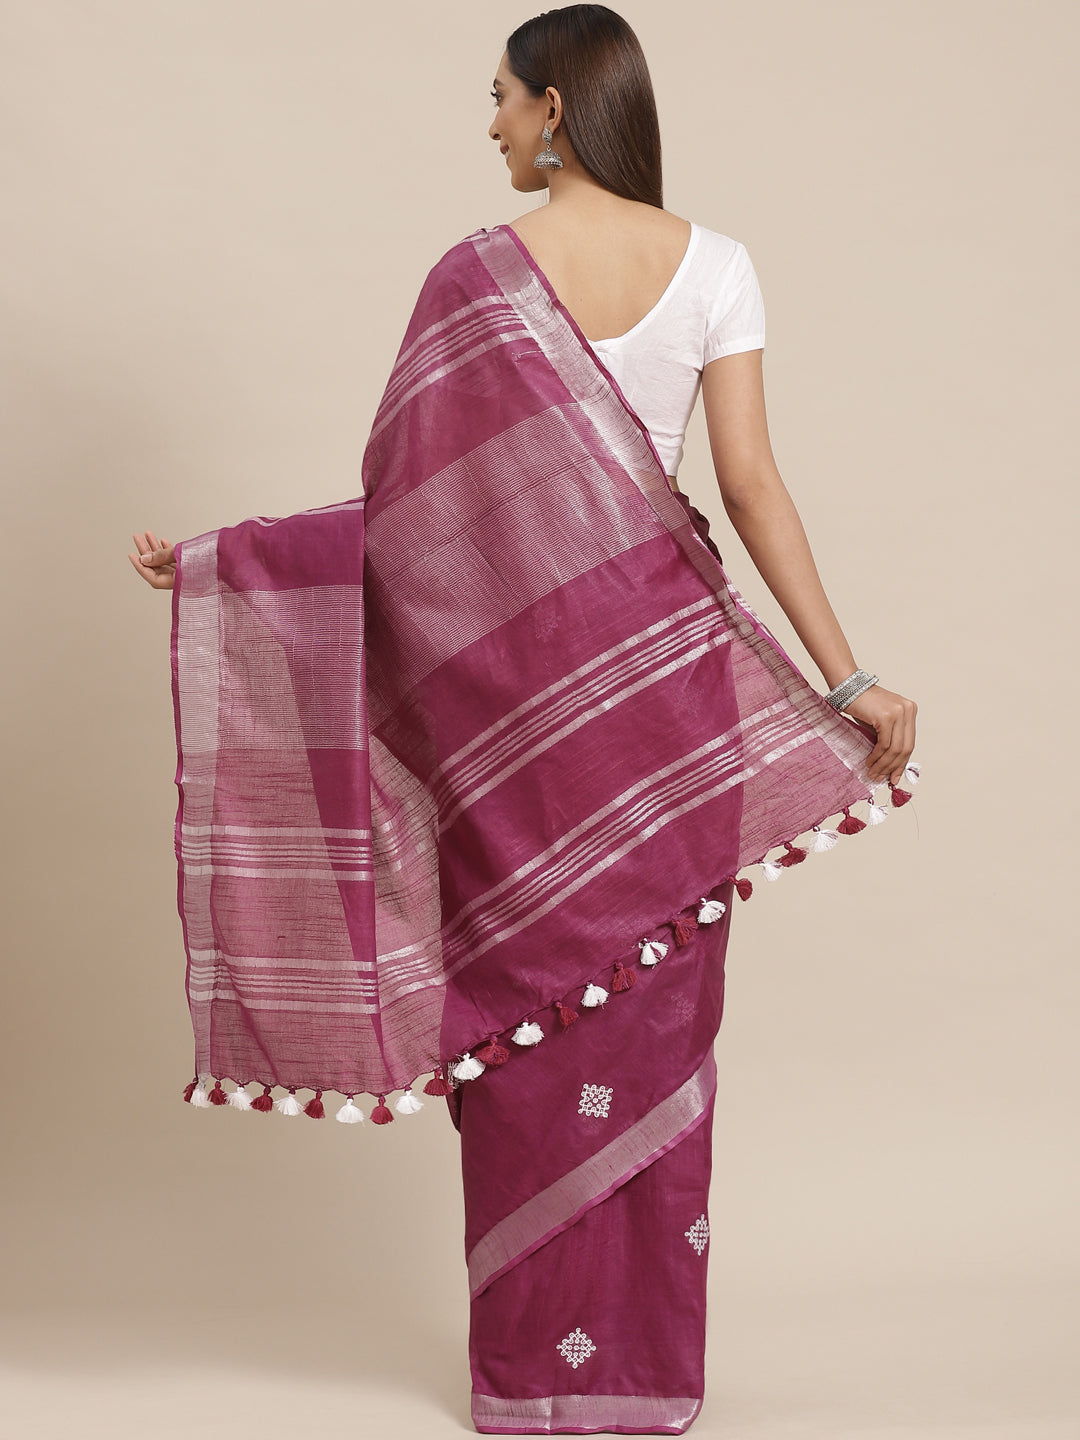 Purple and White, Kalakari India Linen Woven Saree and Blouse ALBGSA0057-Saree-Kalakari India-ALBGSA0057-Cotton, Geographical Indication, Hand Crafted, Heritage Prints, Linen, Natural Dyes, Red, Sarees, Shibori, Sustainable Fabrics, Woven, Yellow-[Linen,Ethnic,wear,Fashionista,Handloom,Handicraft,Indigo,blockprint,block,print,Cotton,Chanderi,Blue, latest,classy,party,bollywood,trendy,summer,style,traditional,formal,elegant,unique,style,hand,block,print, dabu,booti,gift,present,glamorous,affordab